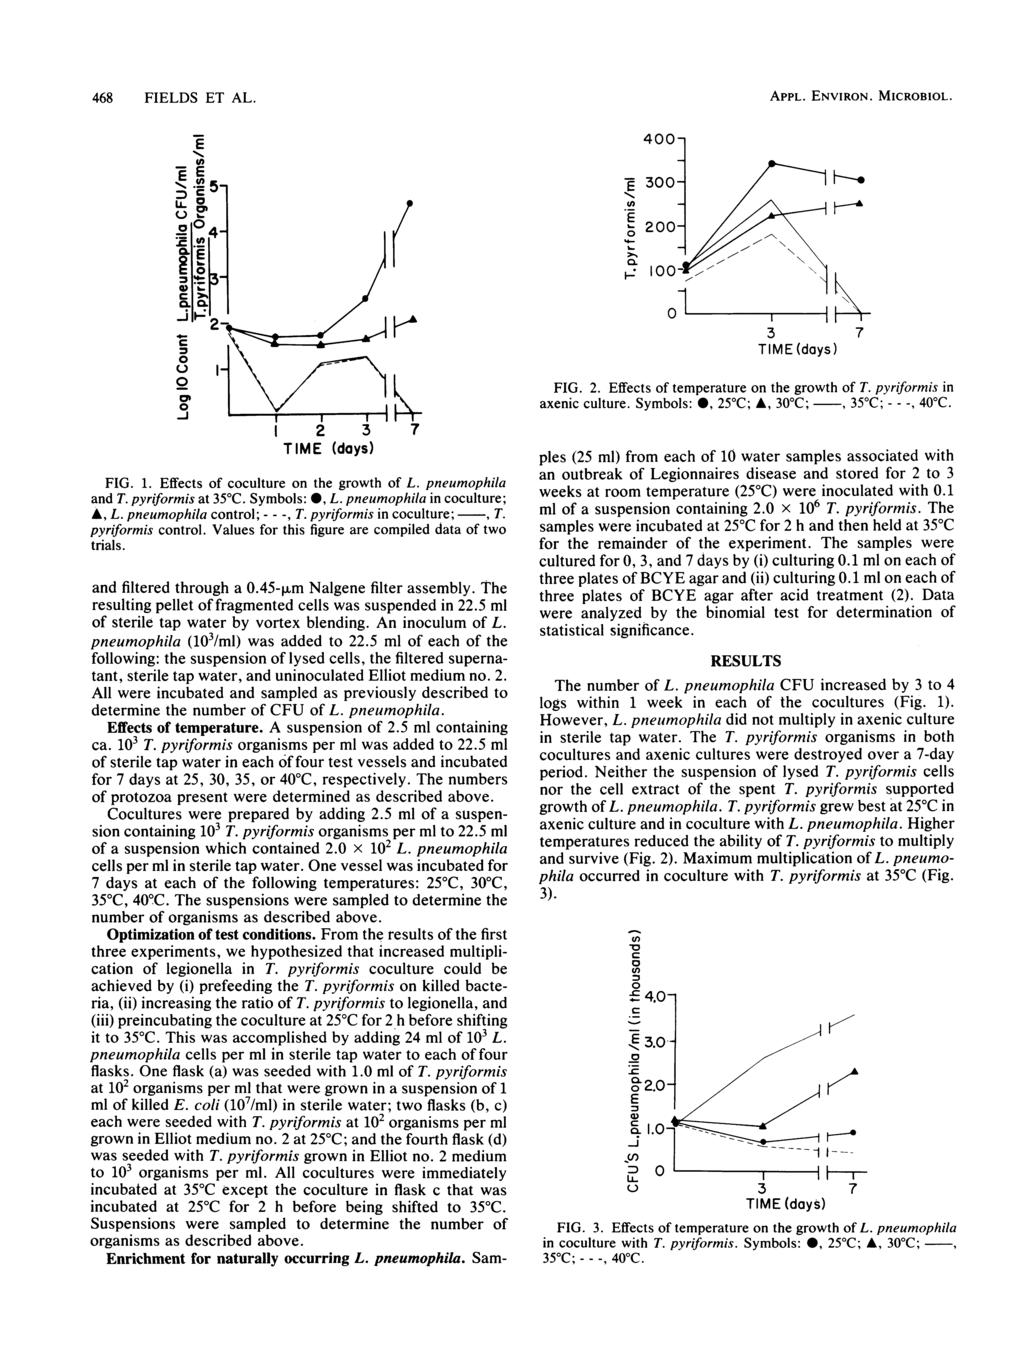 468 FIELDS ET AL. APPL. ENVIRON. MICROBIOL. E 0~~~ 400- E 300- - CEIn s._ O 200-0 Oh. 0.0 2-00- E~~~TM.doii FIG. 1. Effets of oulture on the growth of L. pneumophila and T. pyriformis at 35 C.